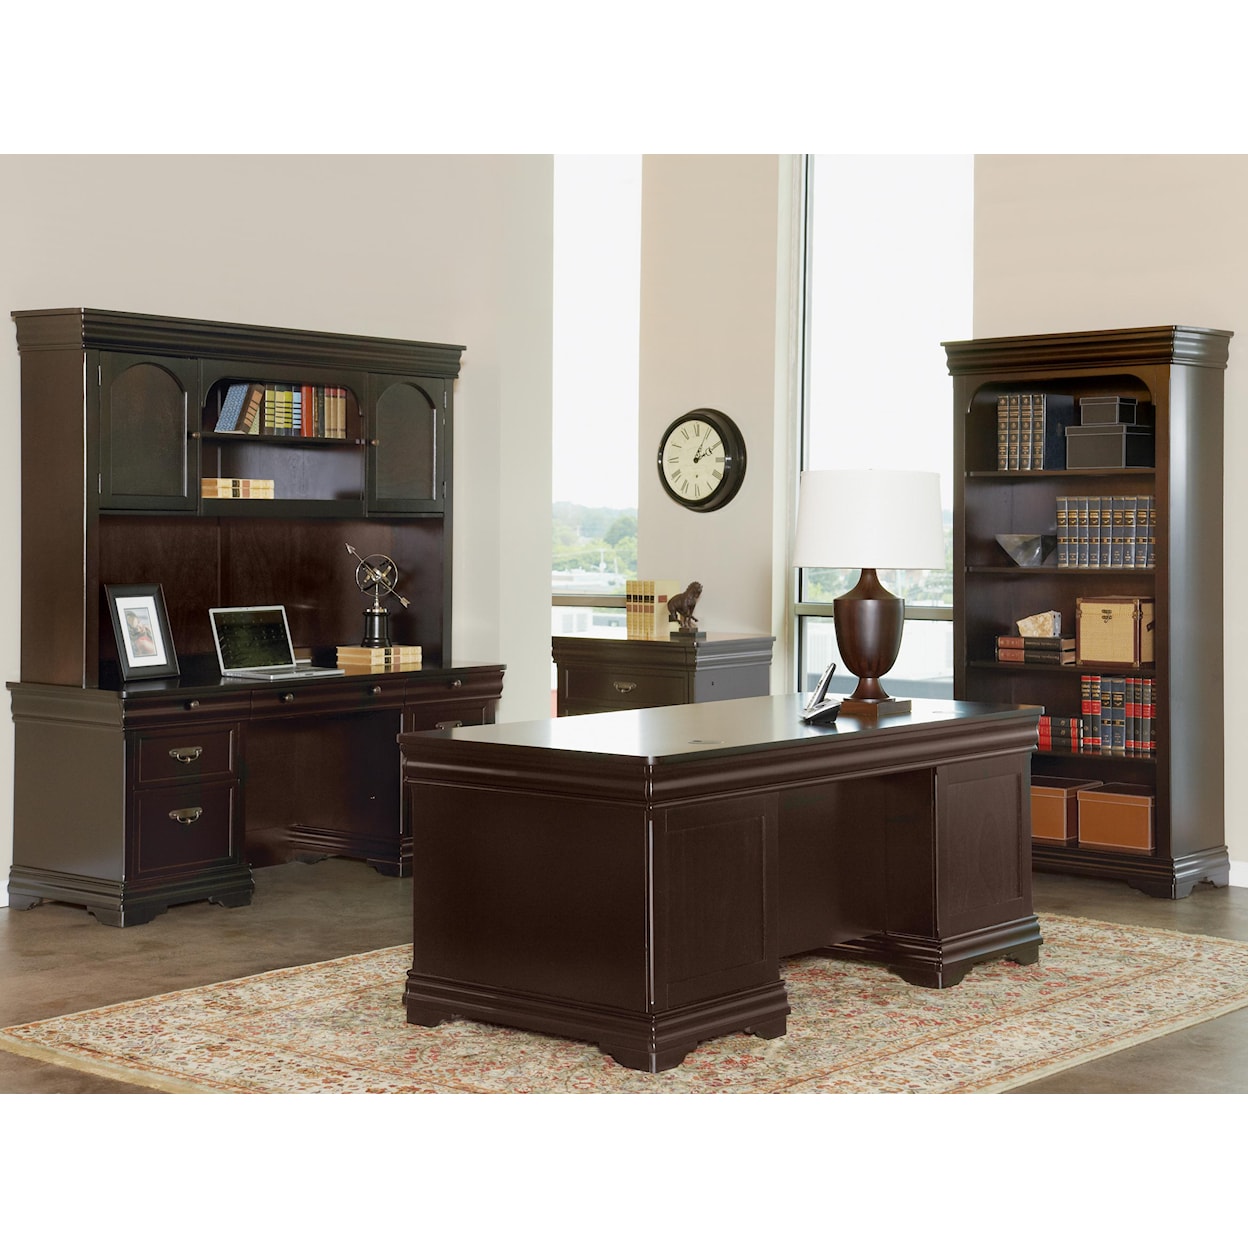 Martin Home Furnishings Beaumont Credenza with Hutch